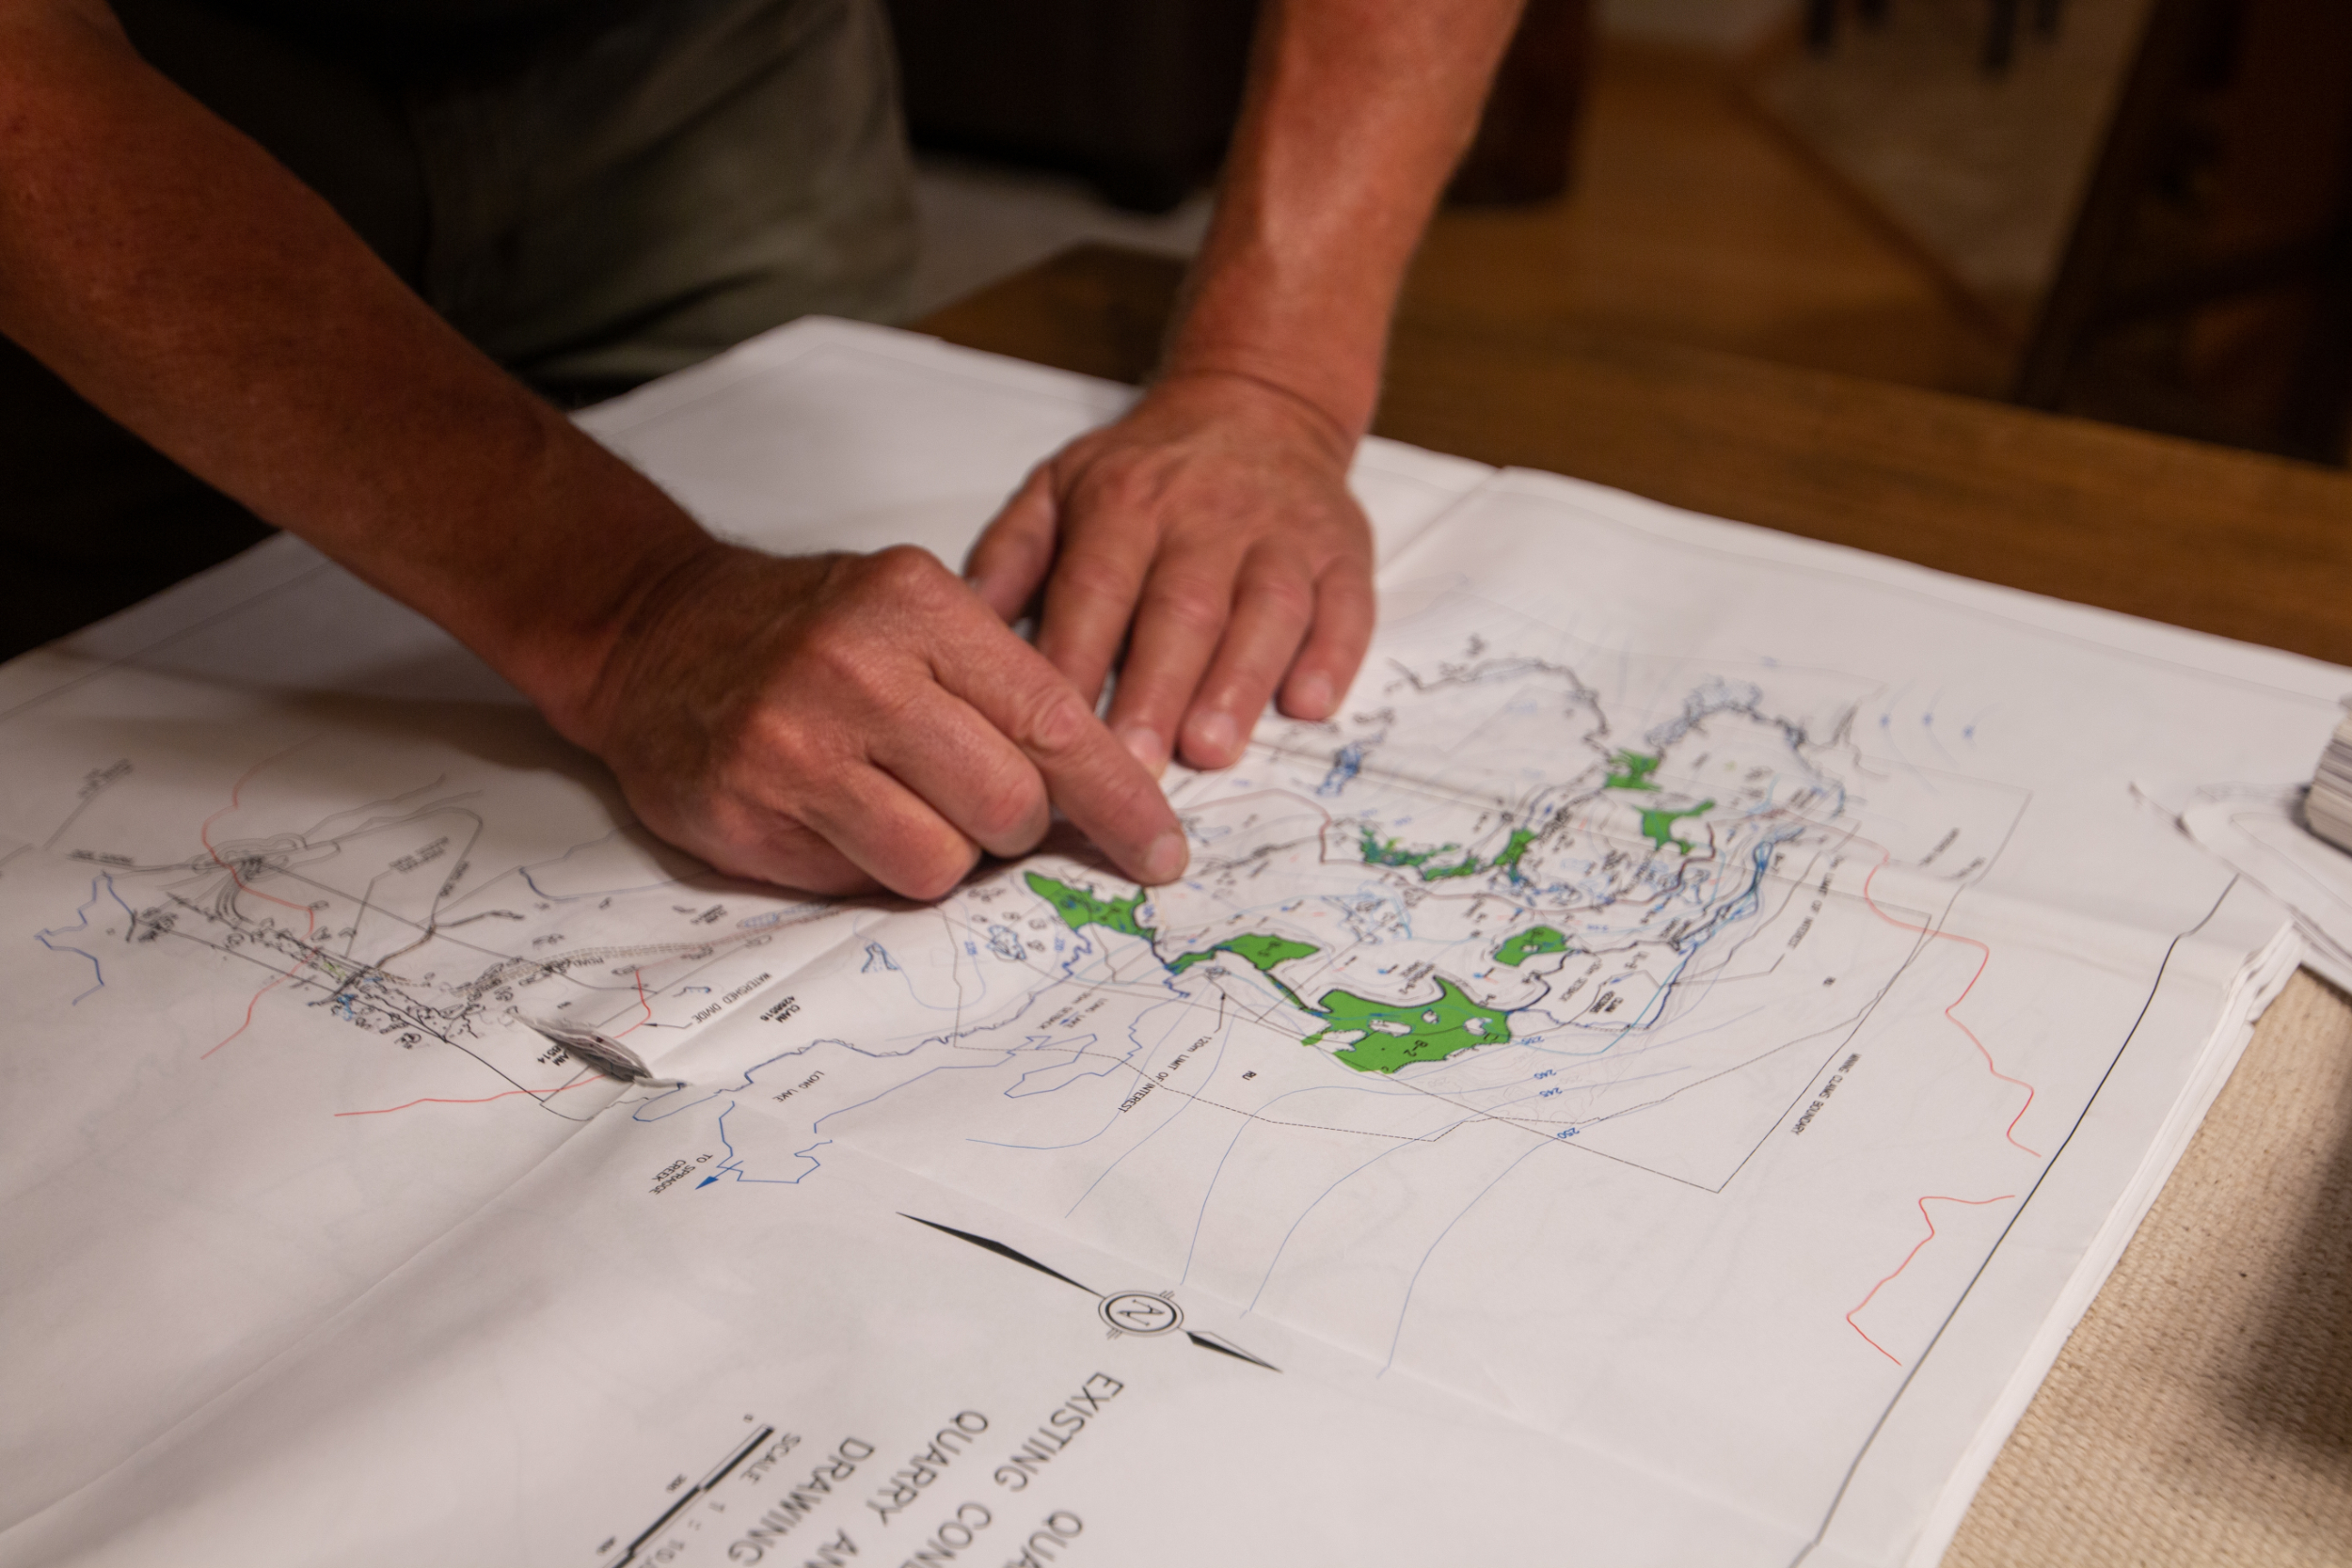 A man's hands point to a quarry on a map spread out on a table